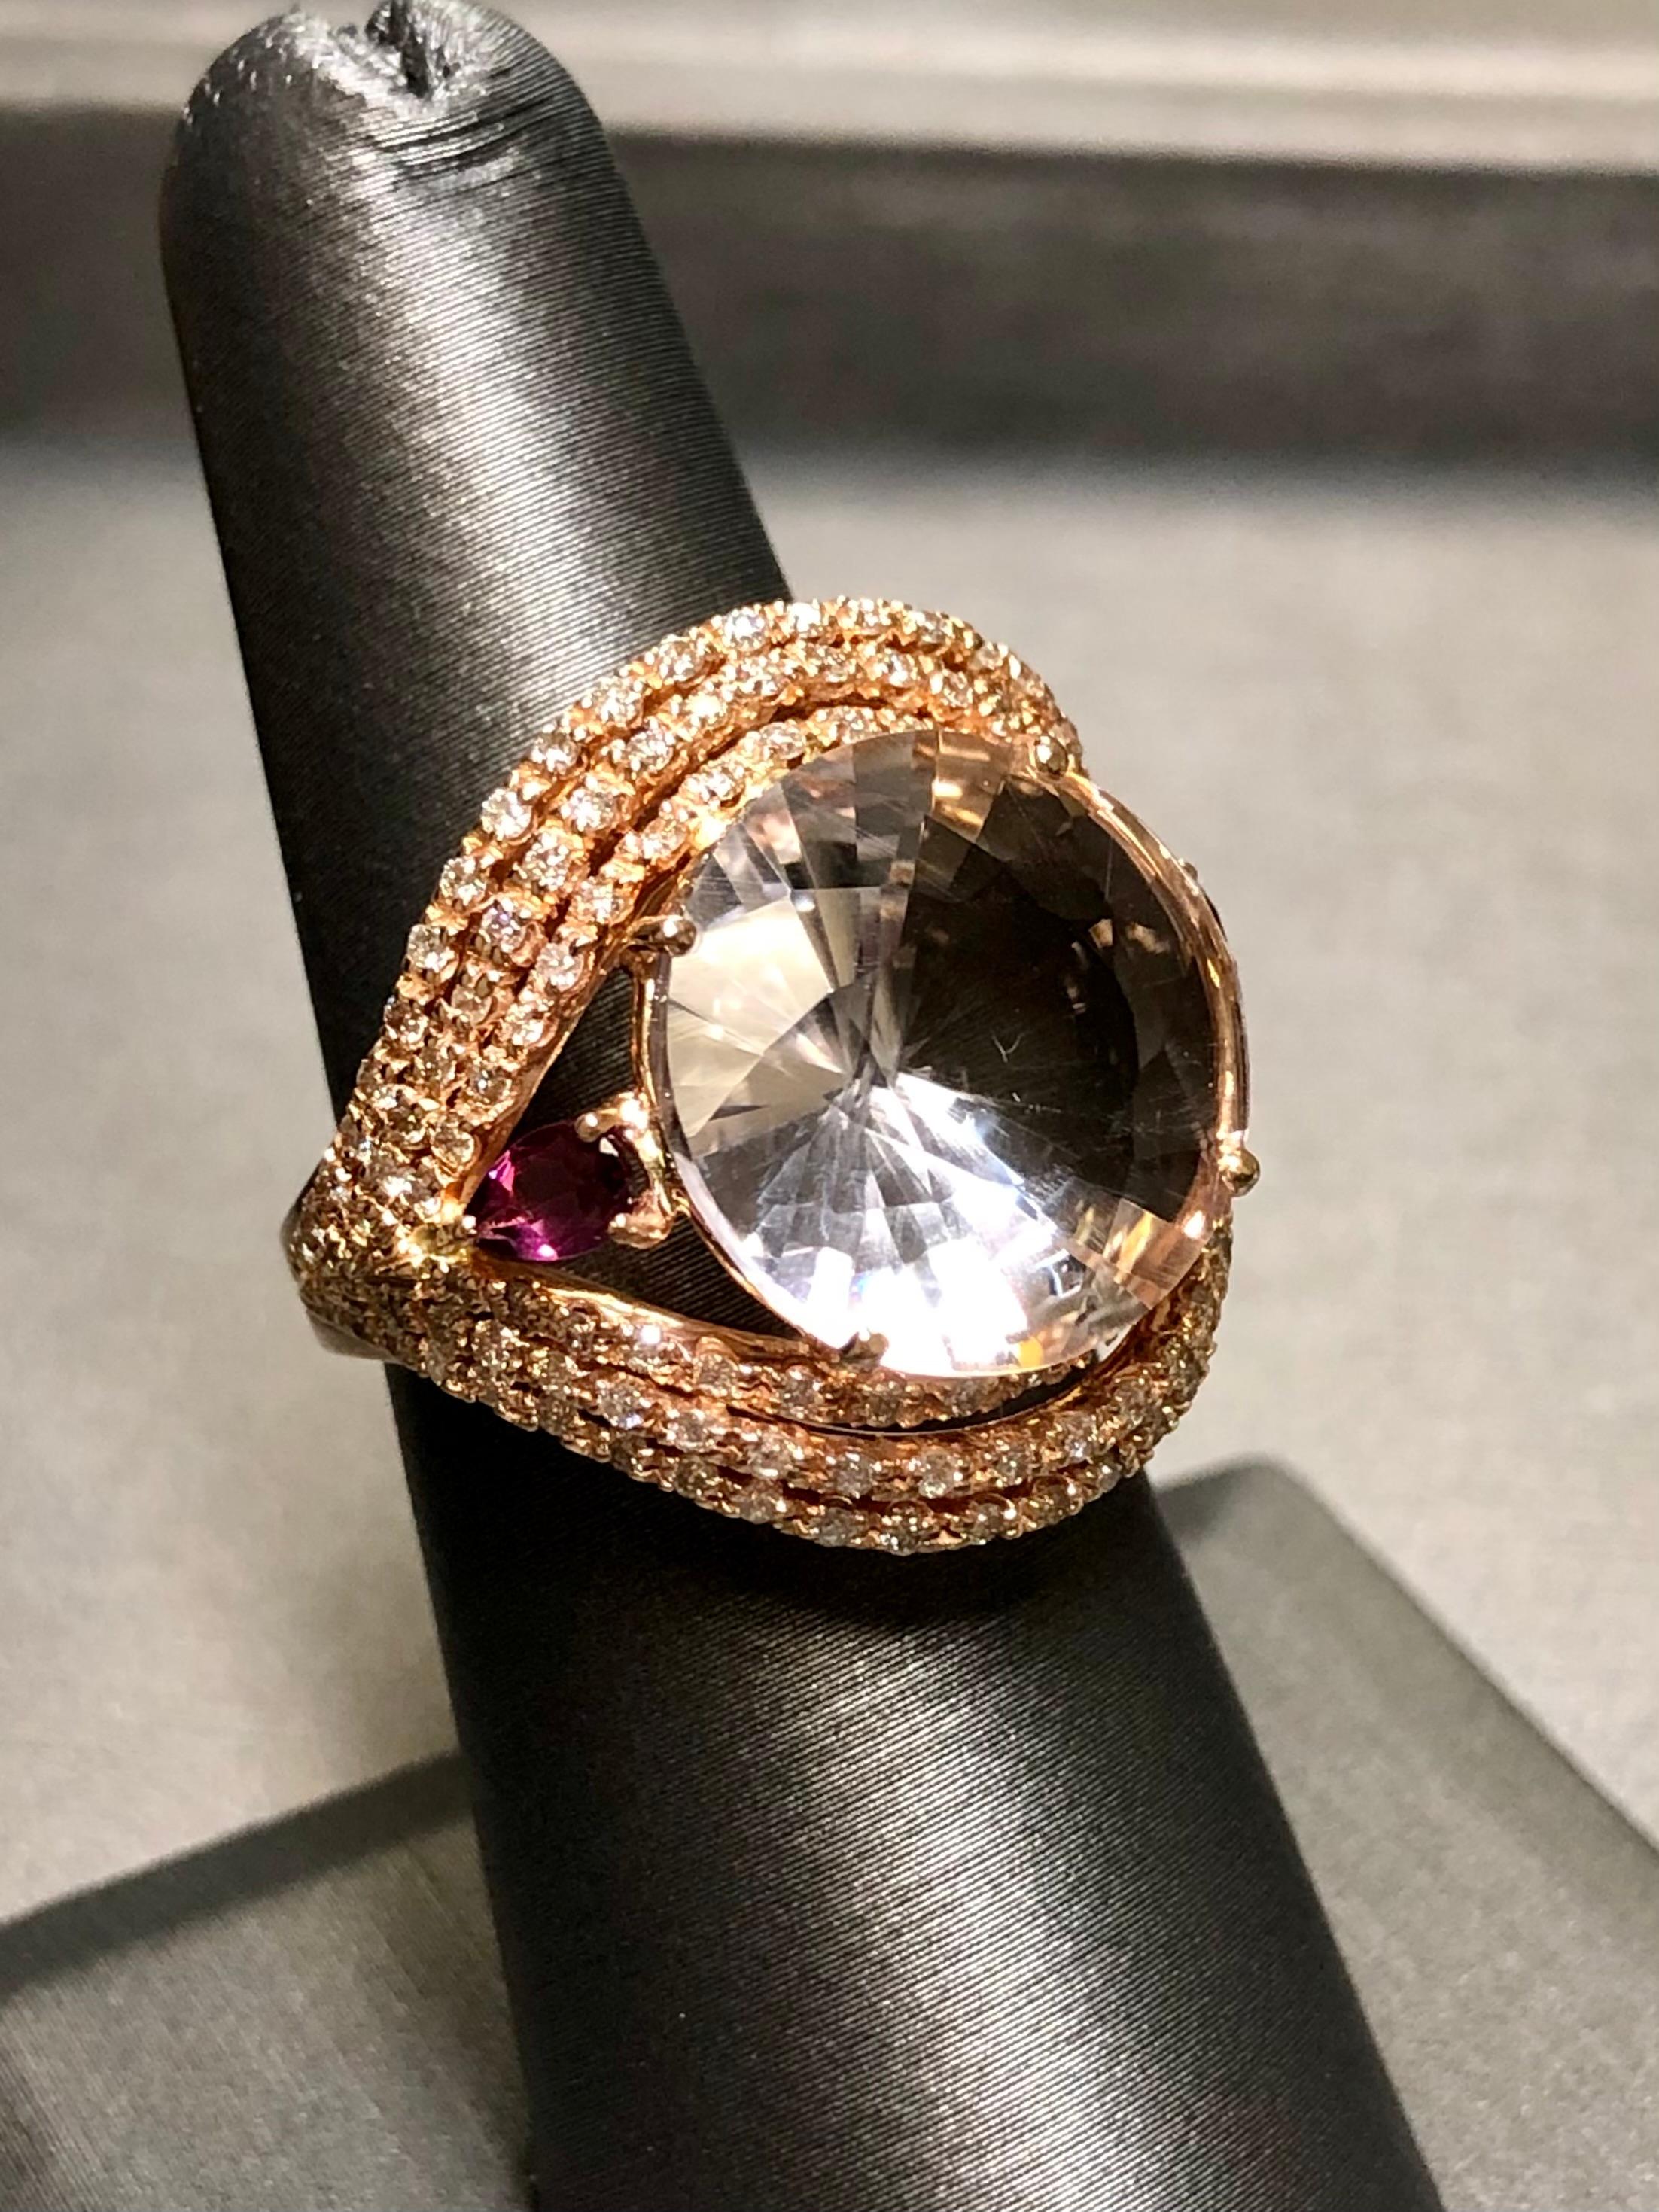 
A bold and beautiful cocktail ring done in 18K rose gold centered by an approximately 9.70ct pale rose quartz flanked on either side by natural pink tourmaline pear shapes averaging 1cttw together. Surrounding all of that wonderful color is